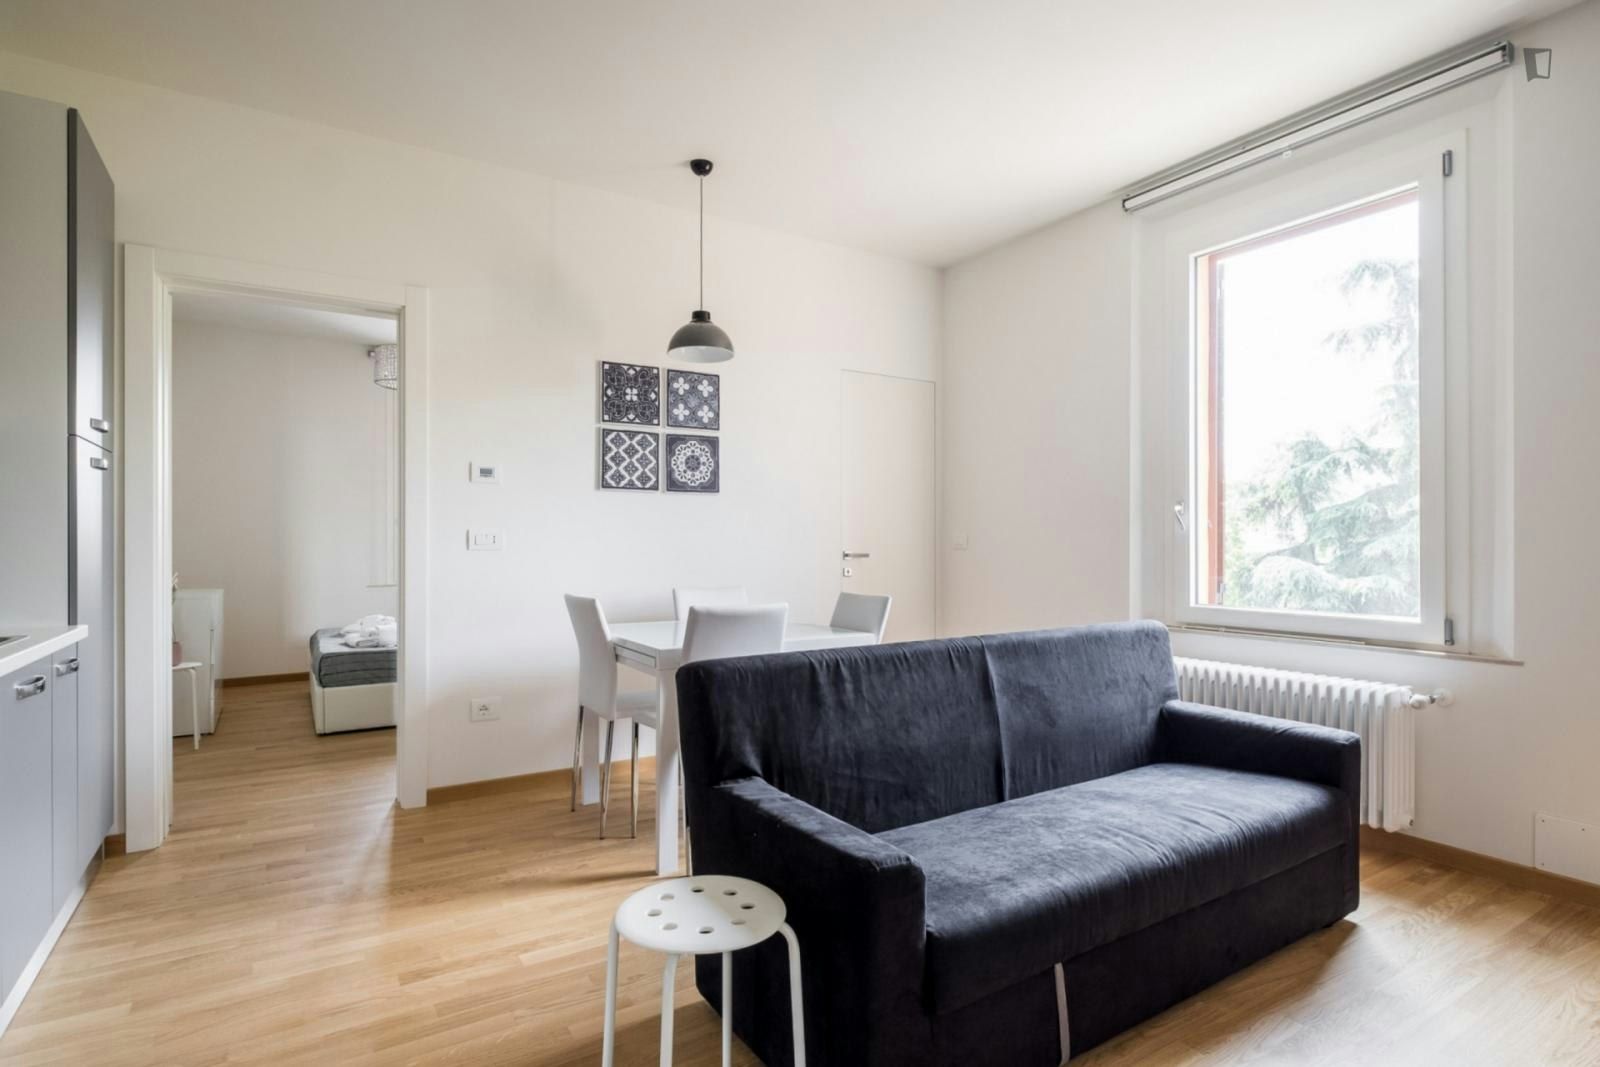 Pleasant one-bedroom apartment super close to the university